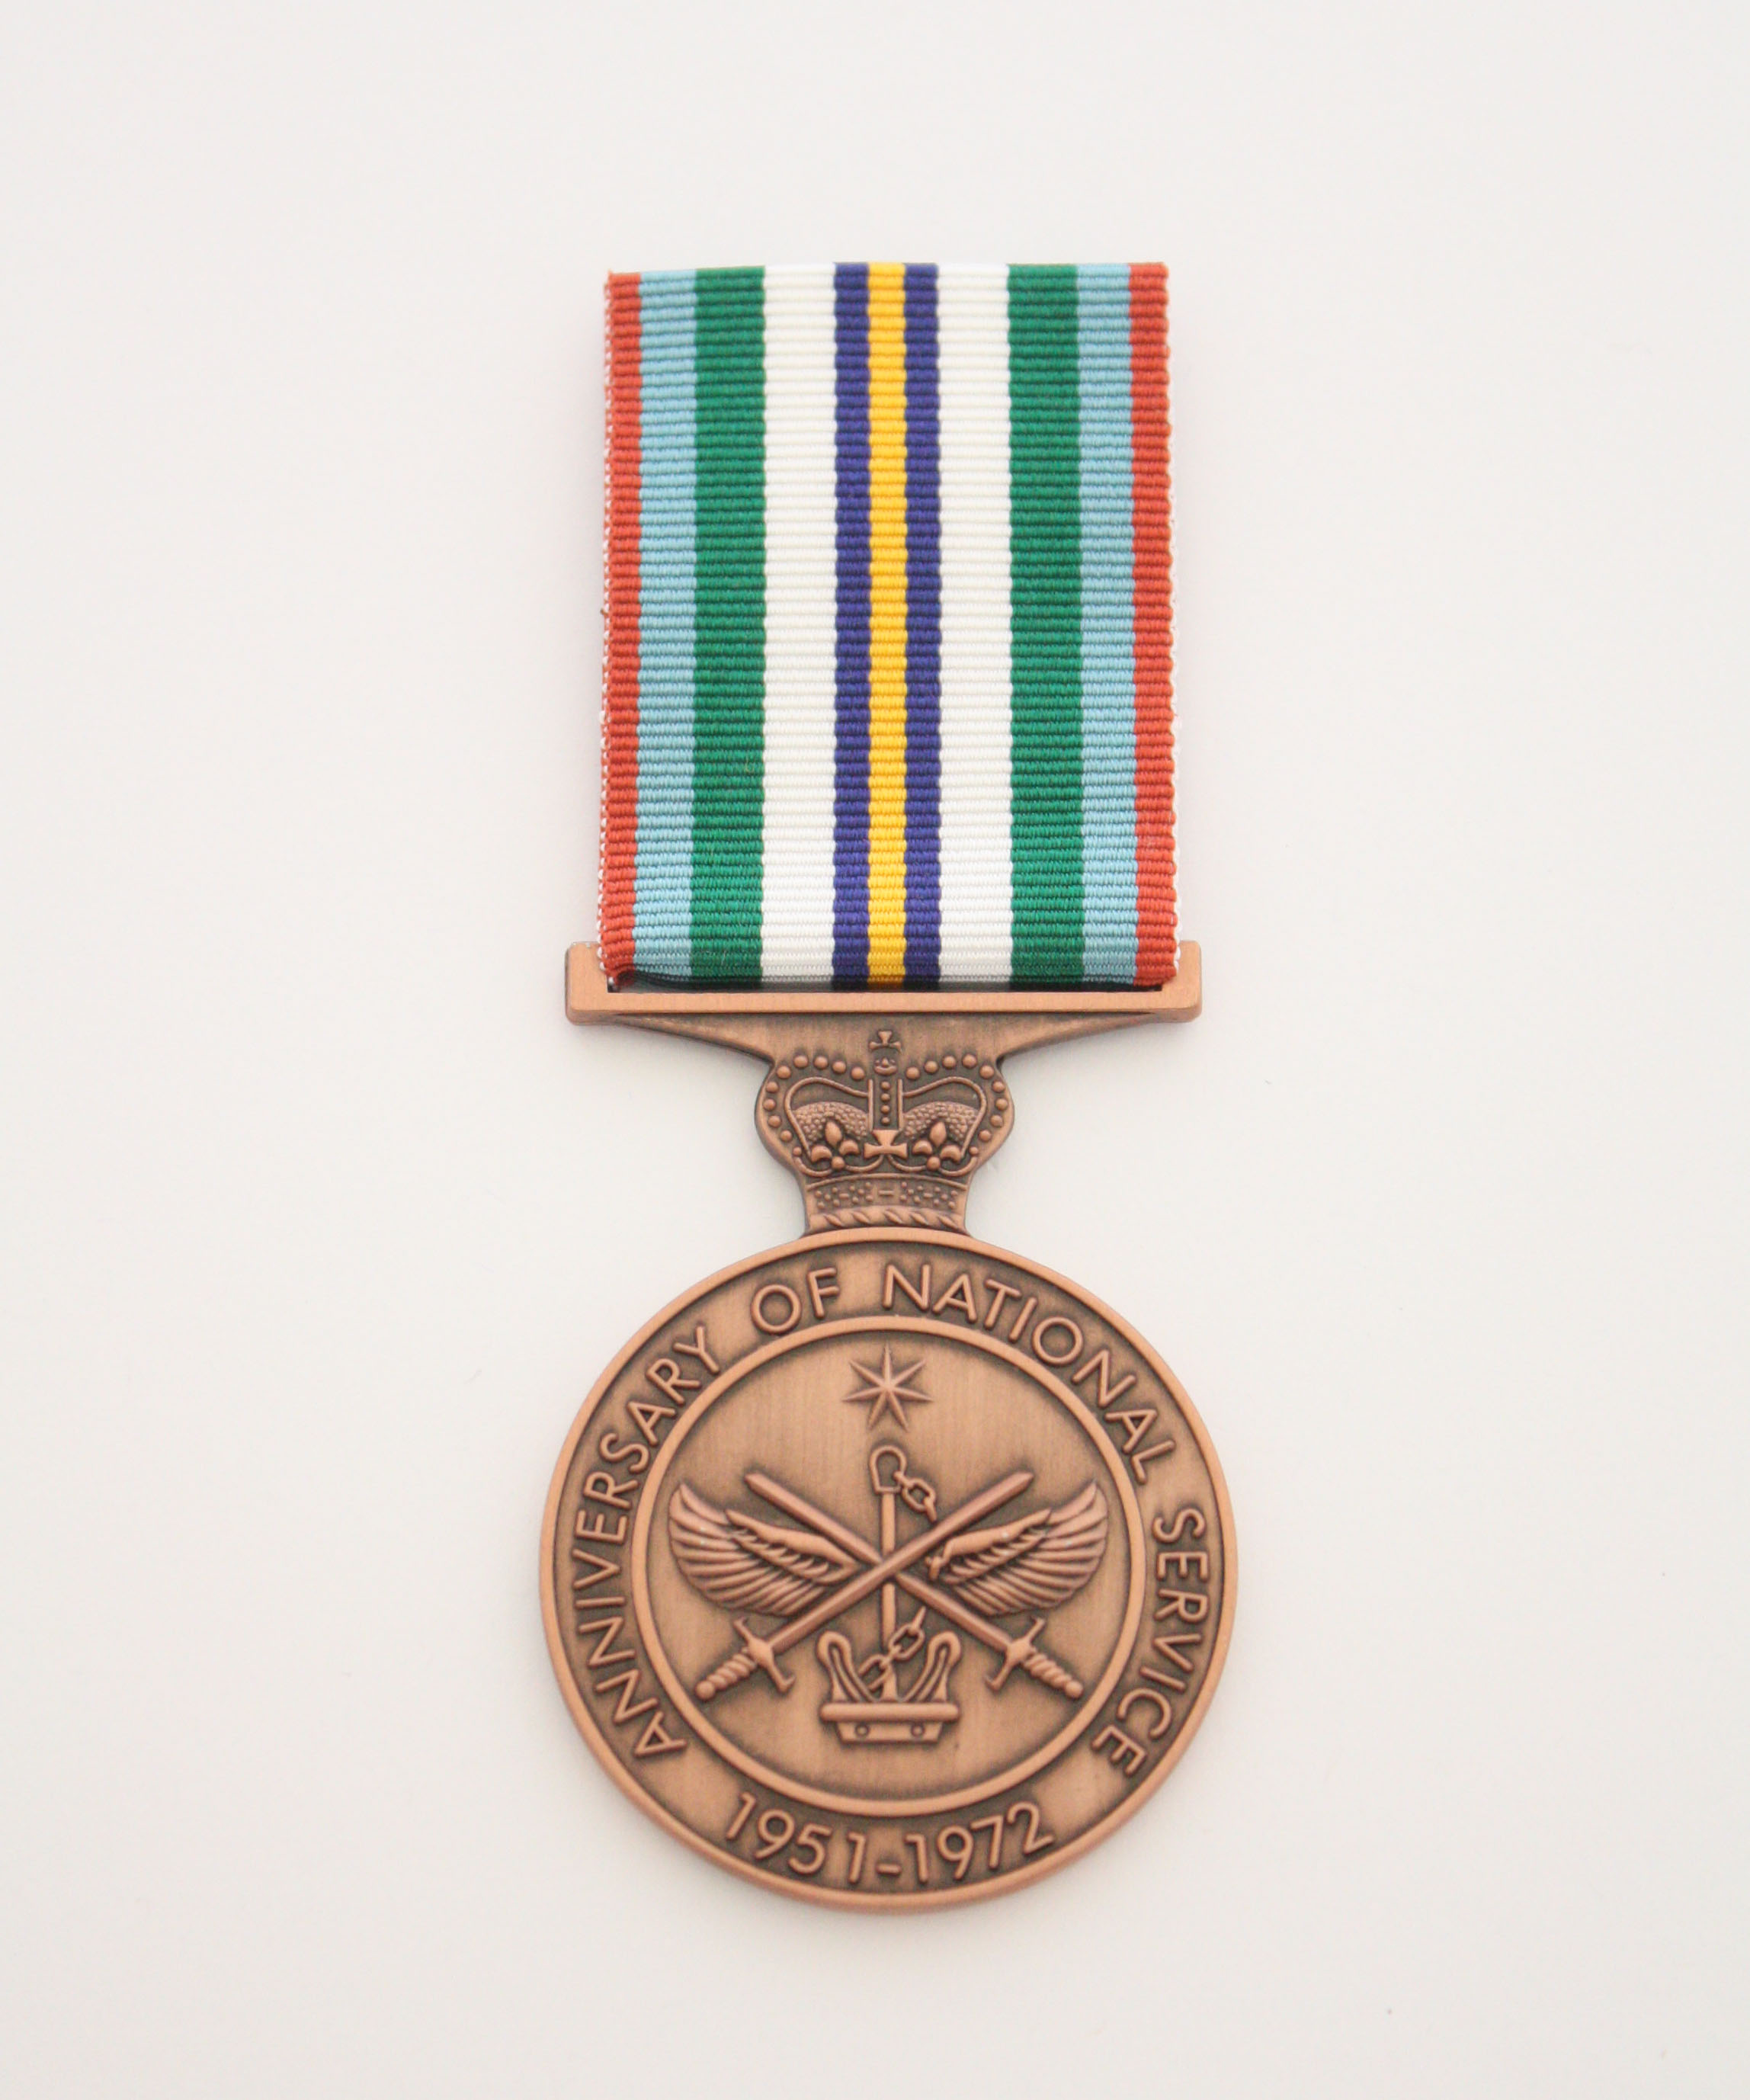 Anniversary of National Service Medal 1951-1972